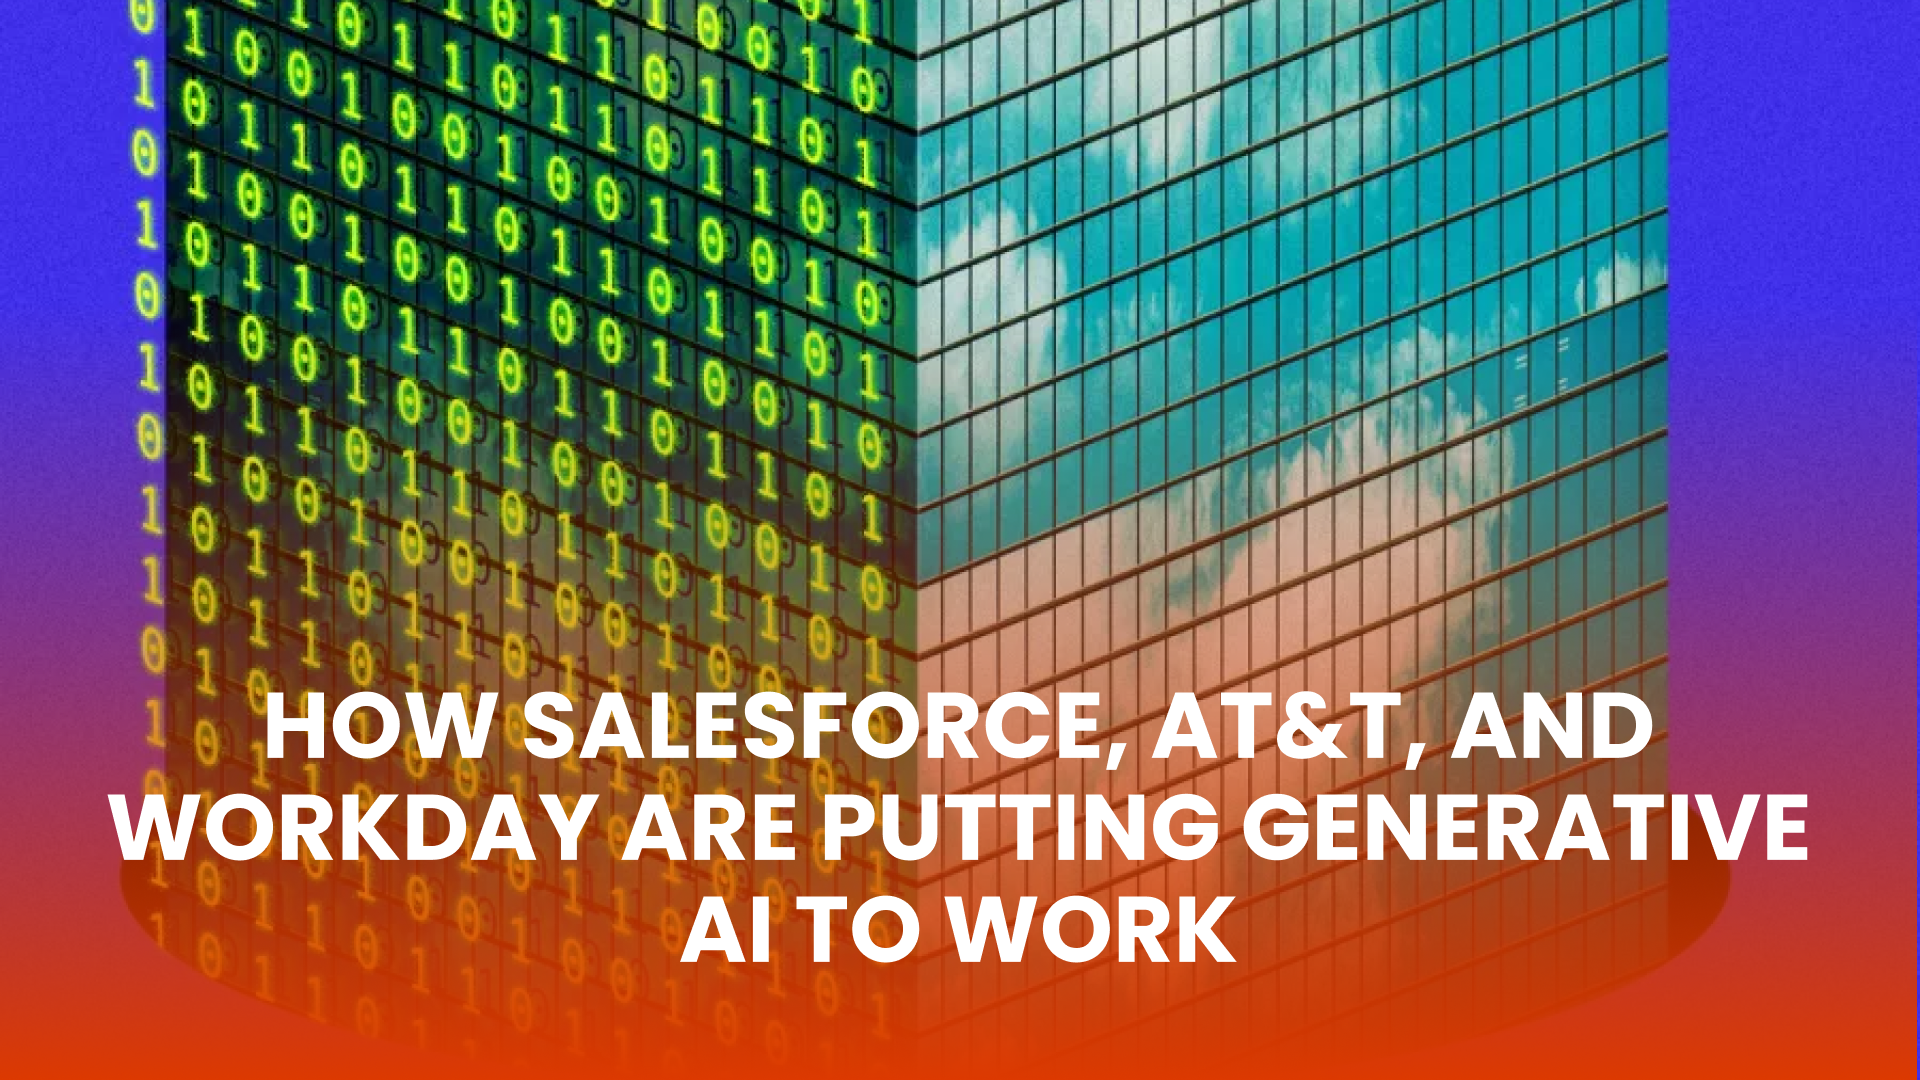 How legacy companies like Salesforce, AT&T, and Workday are putting generative AI to work